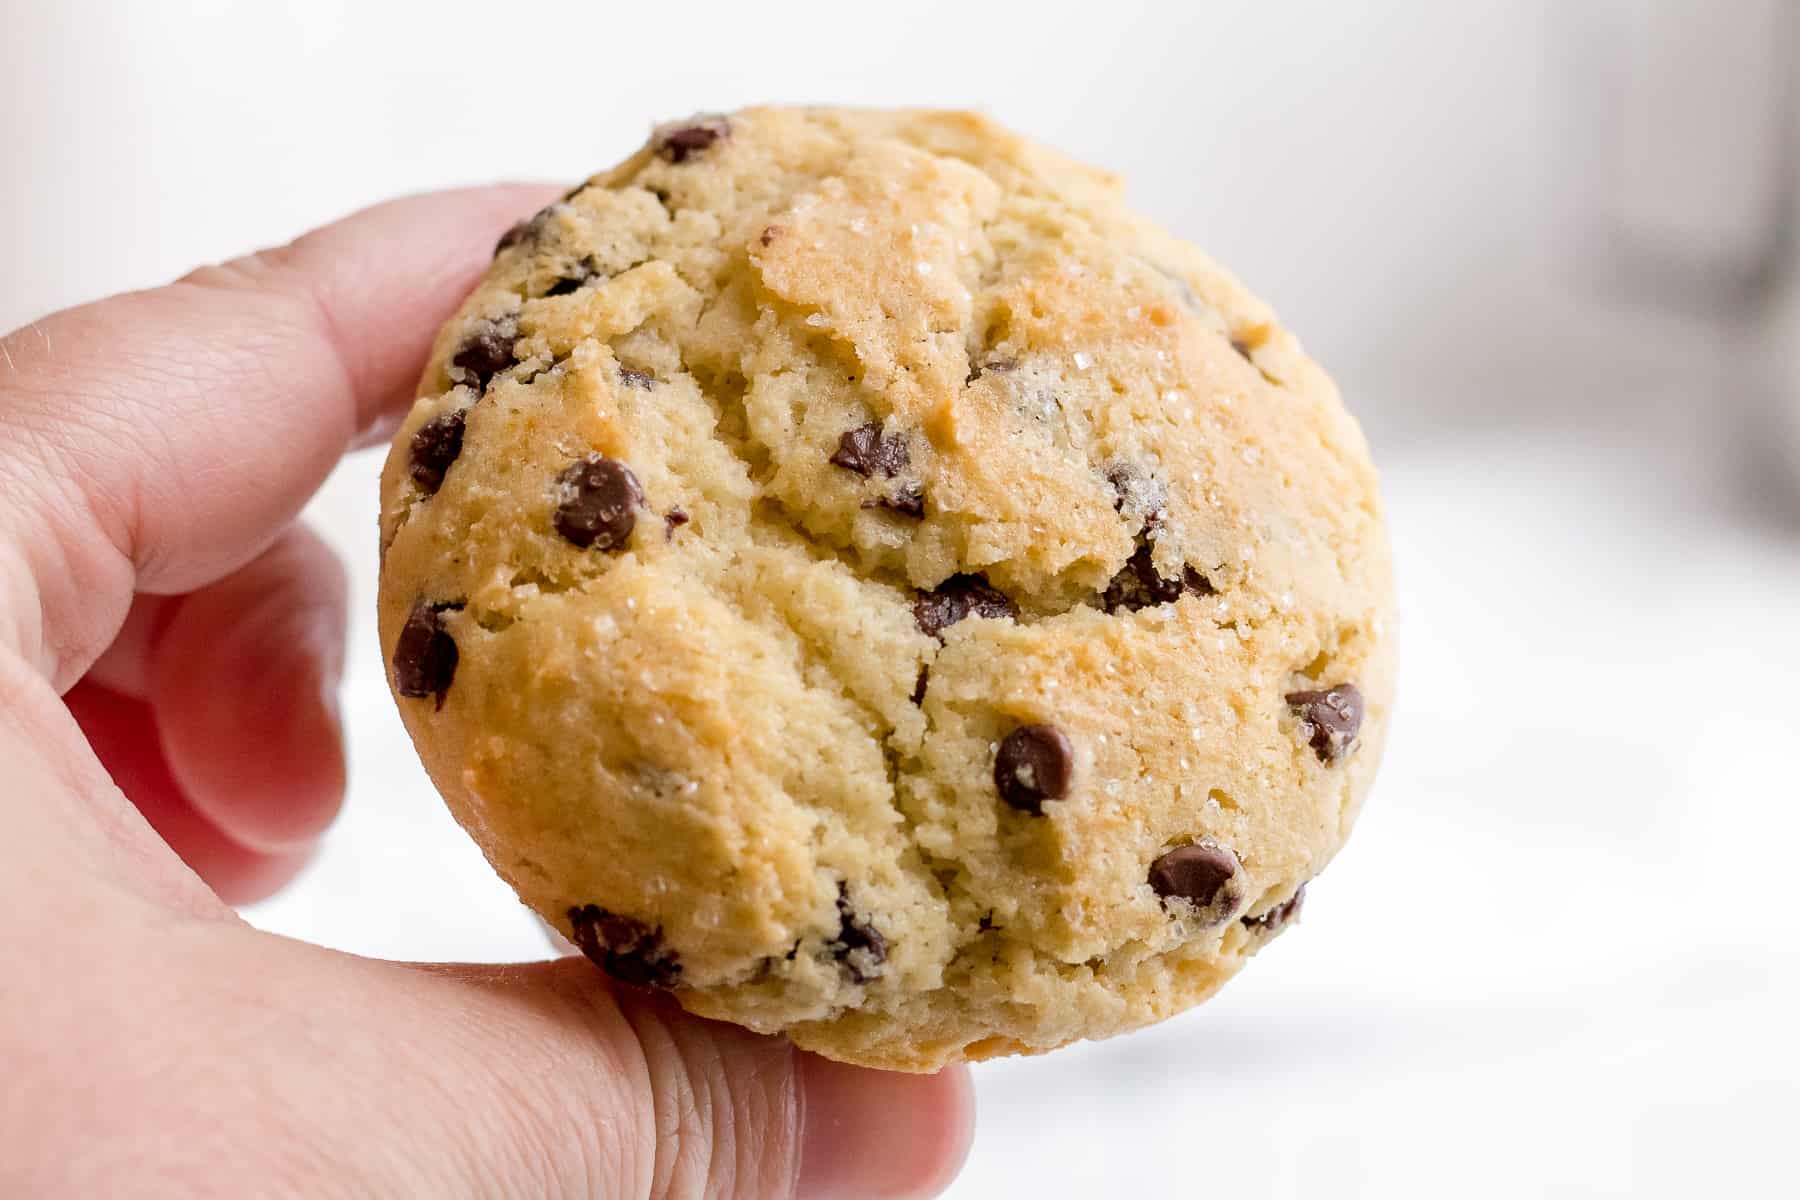 hand holding a gluten free chocolate chip muffin